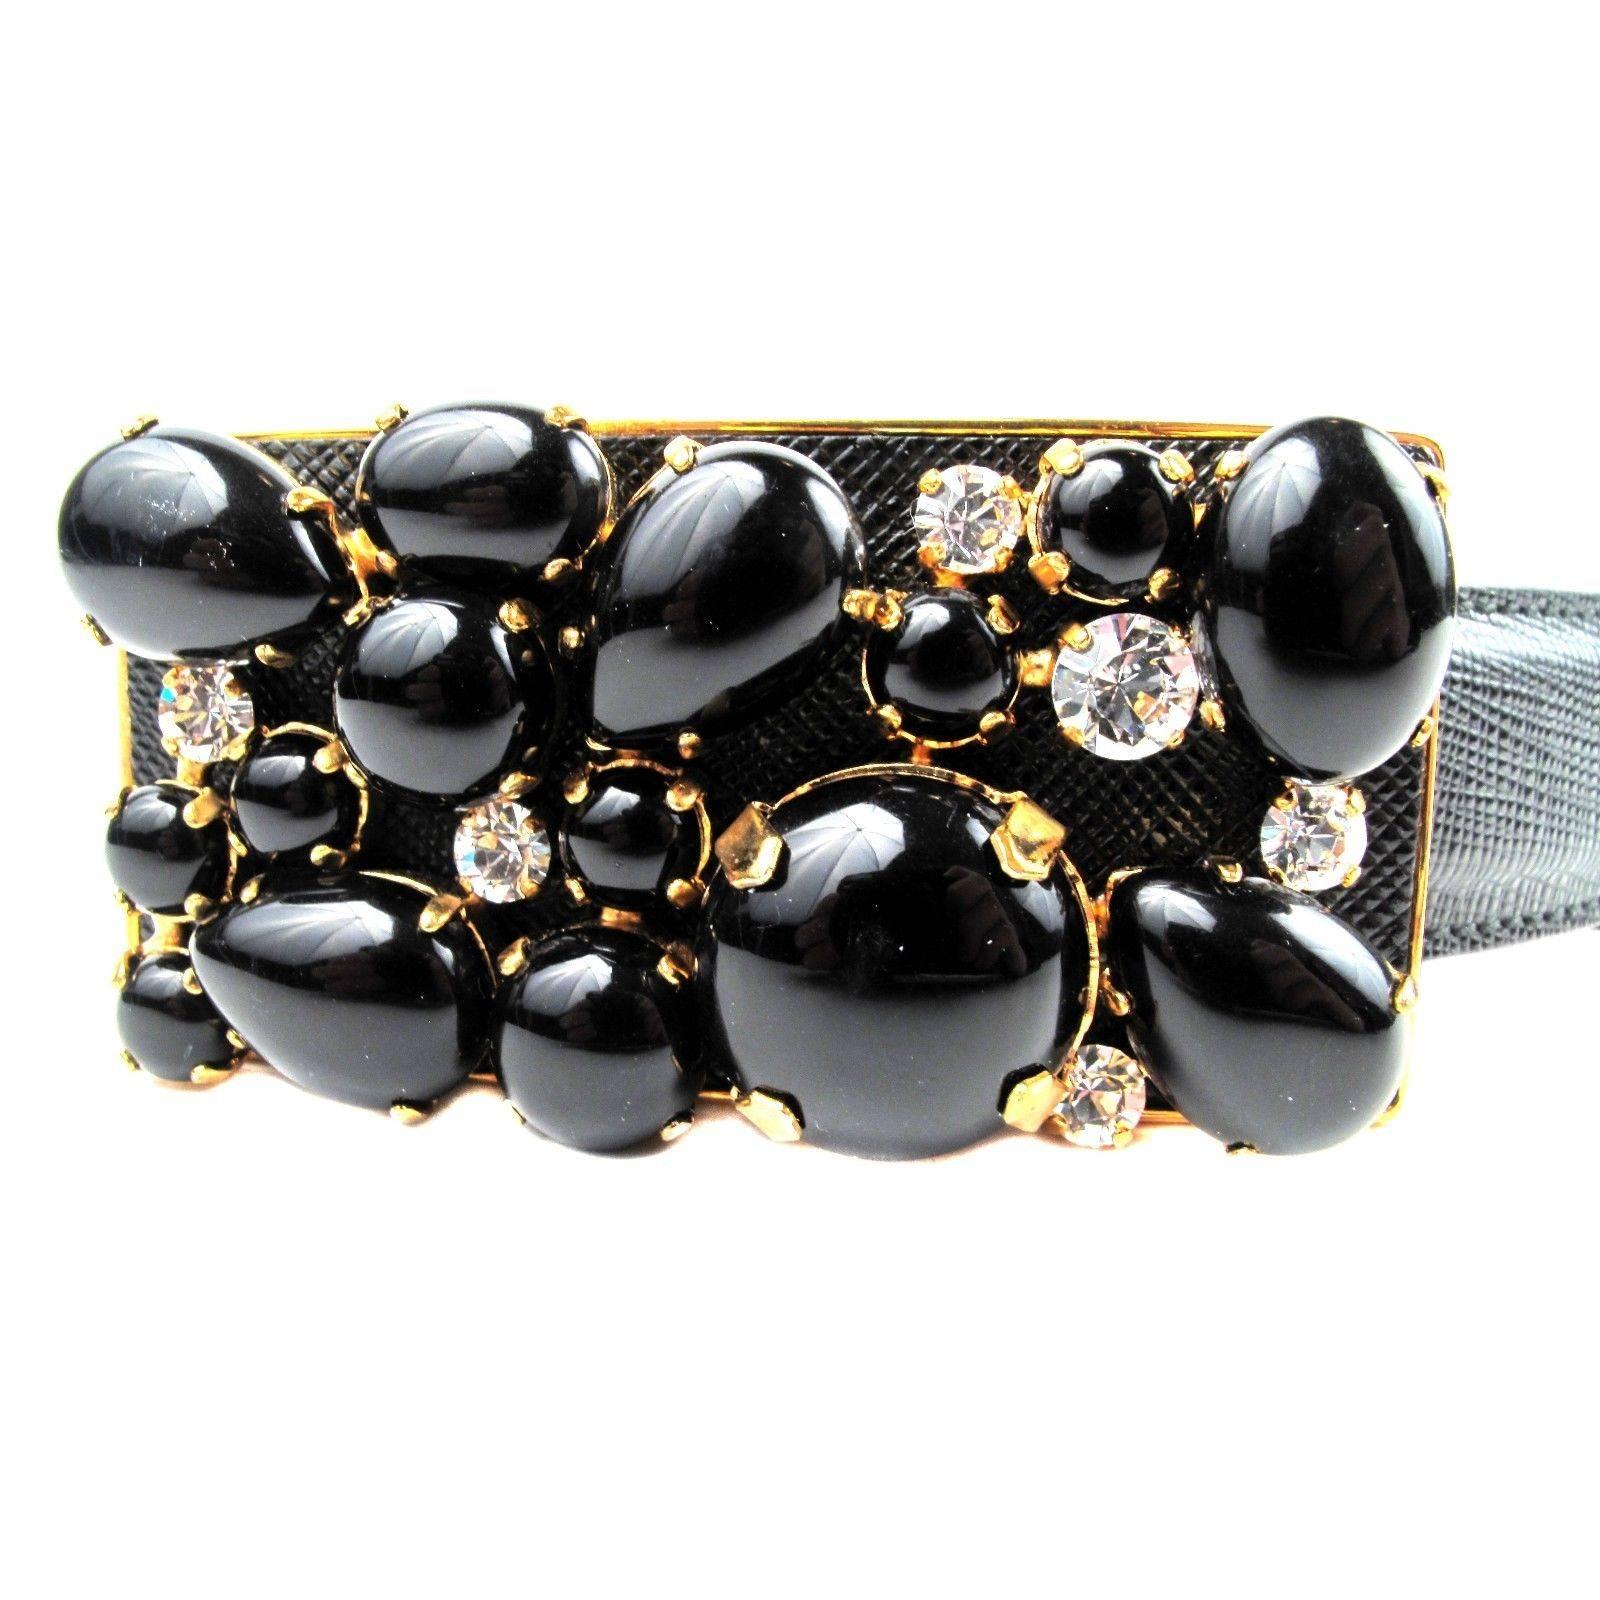 Prada -  Saffiano Jewel Belt

Color: Black

Material: Leather 

Size: Small 

------------------------------------------------------------

Details:

- embellishments at buckle

- gold tone hardware

- peg-in-hole closure

- item #